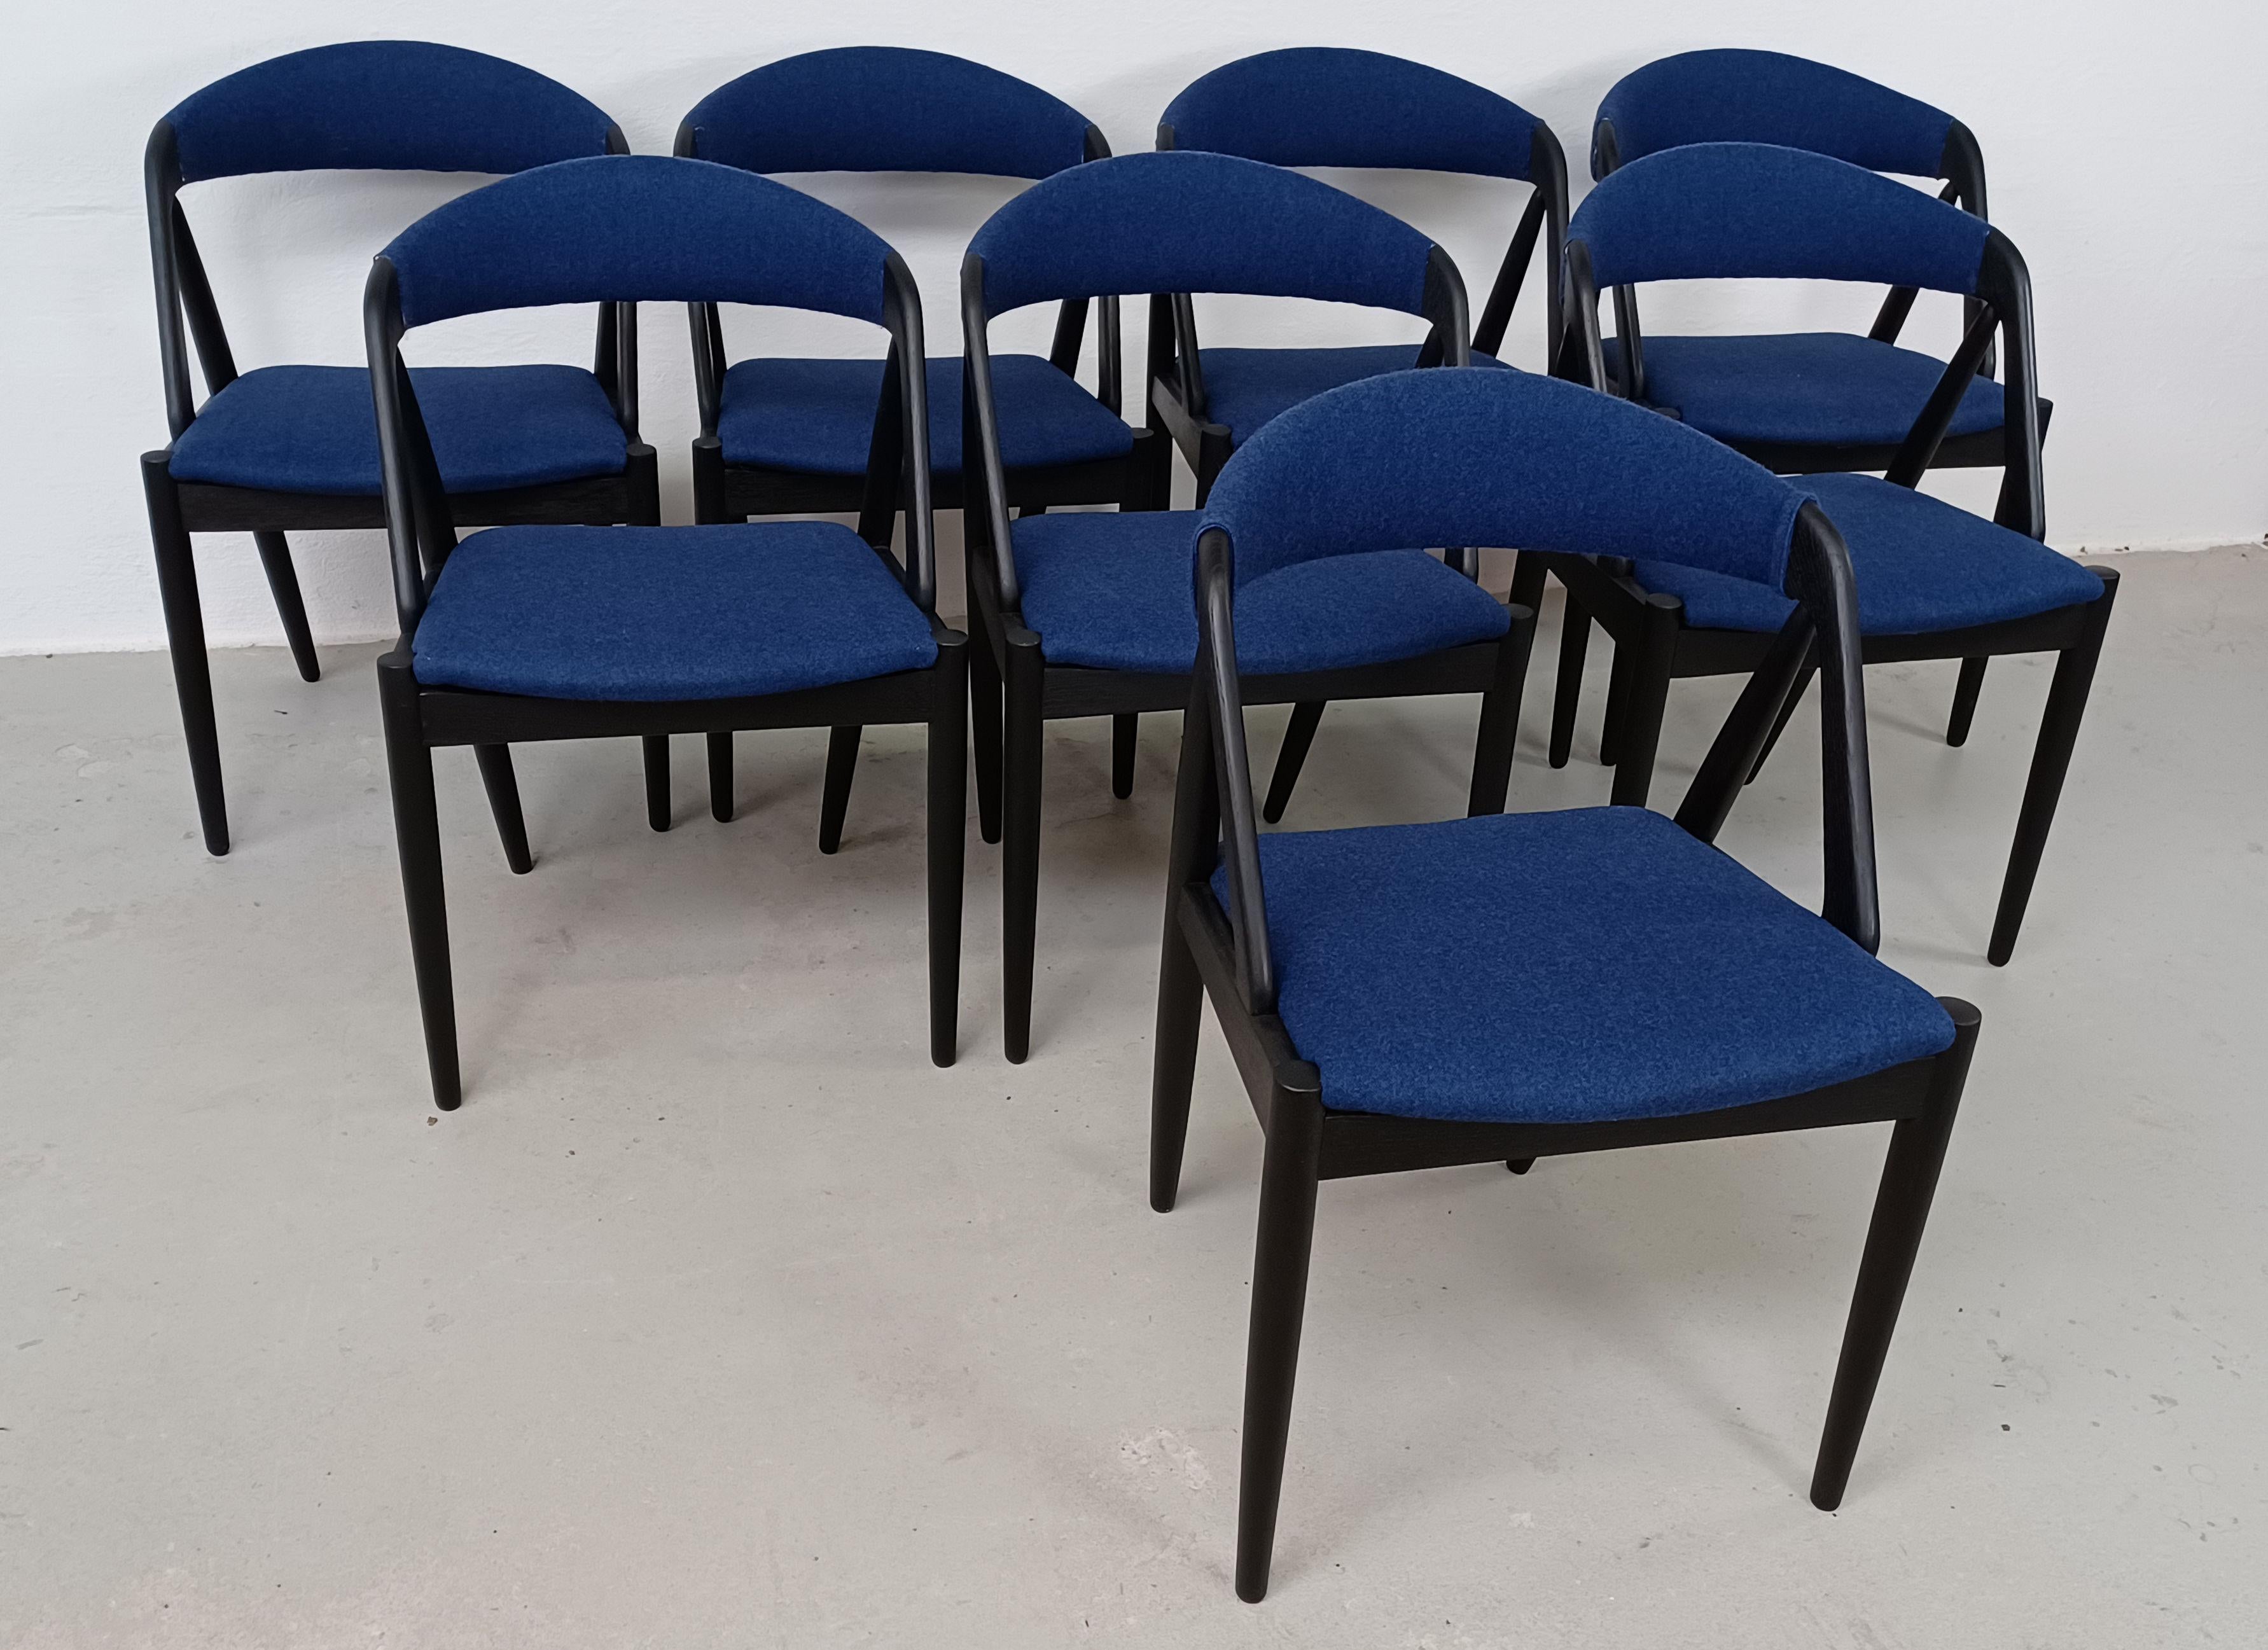 Set of eight fully restored ebonized and reupholstered Kai Kristiansen Oak Dining Chairs

The A-frame model 31 dining chairs were designed by Kai Kristiansen in 1956 for Schou-Andersens Møbelfabrik and the A-frame chair is one of the most well-known